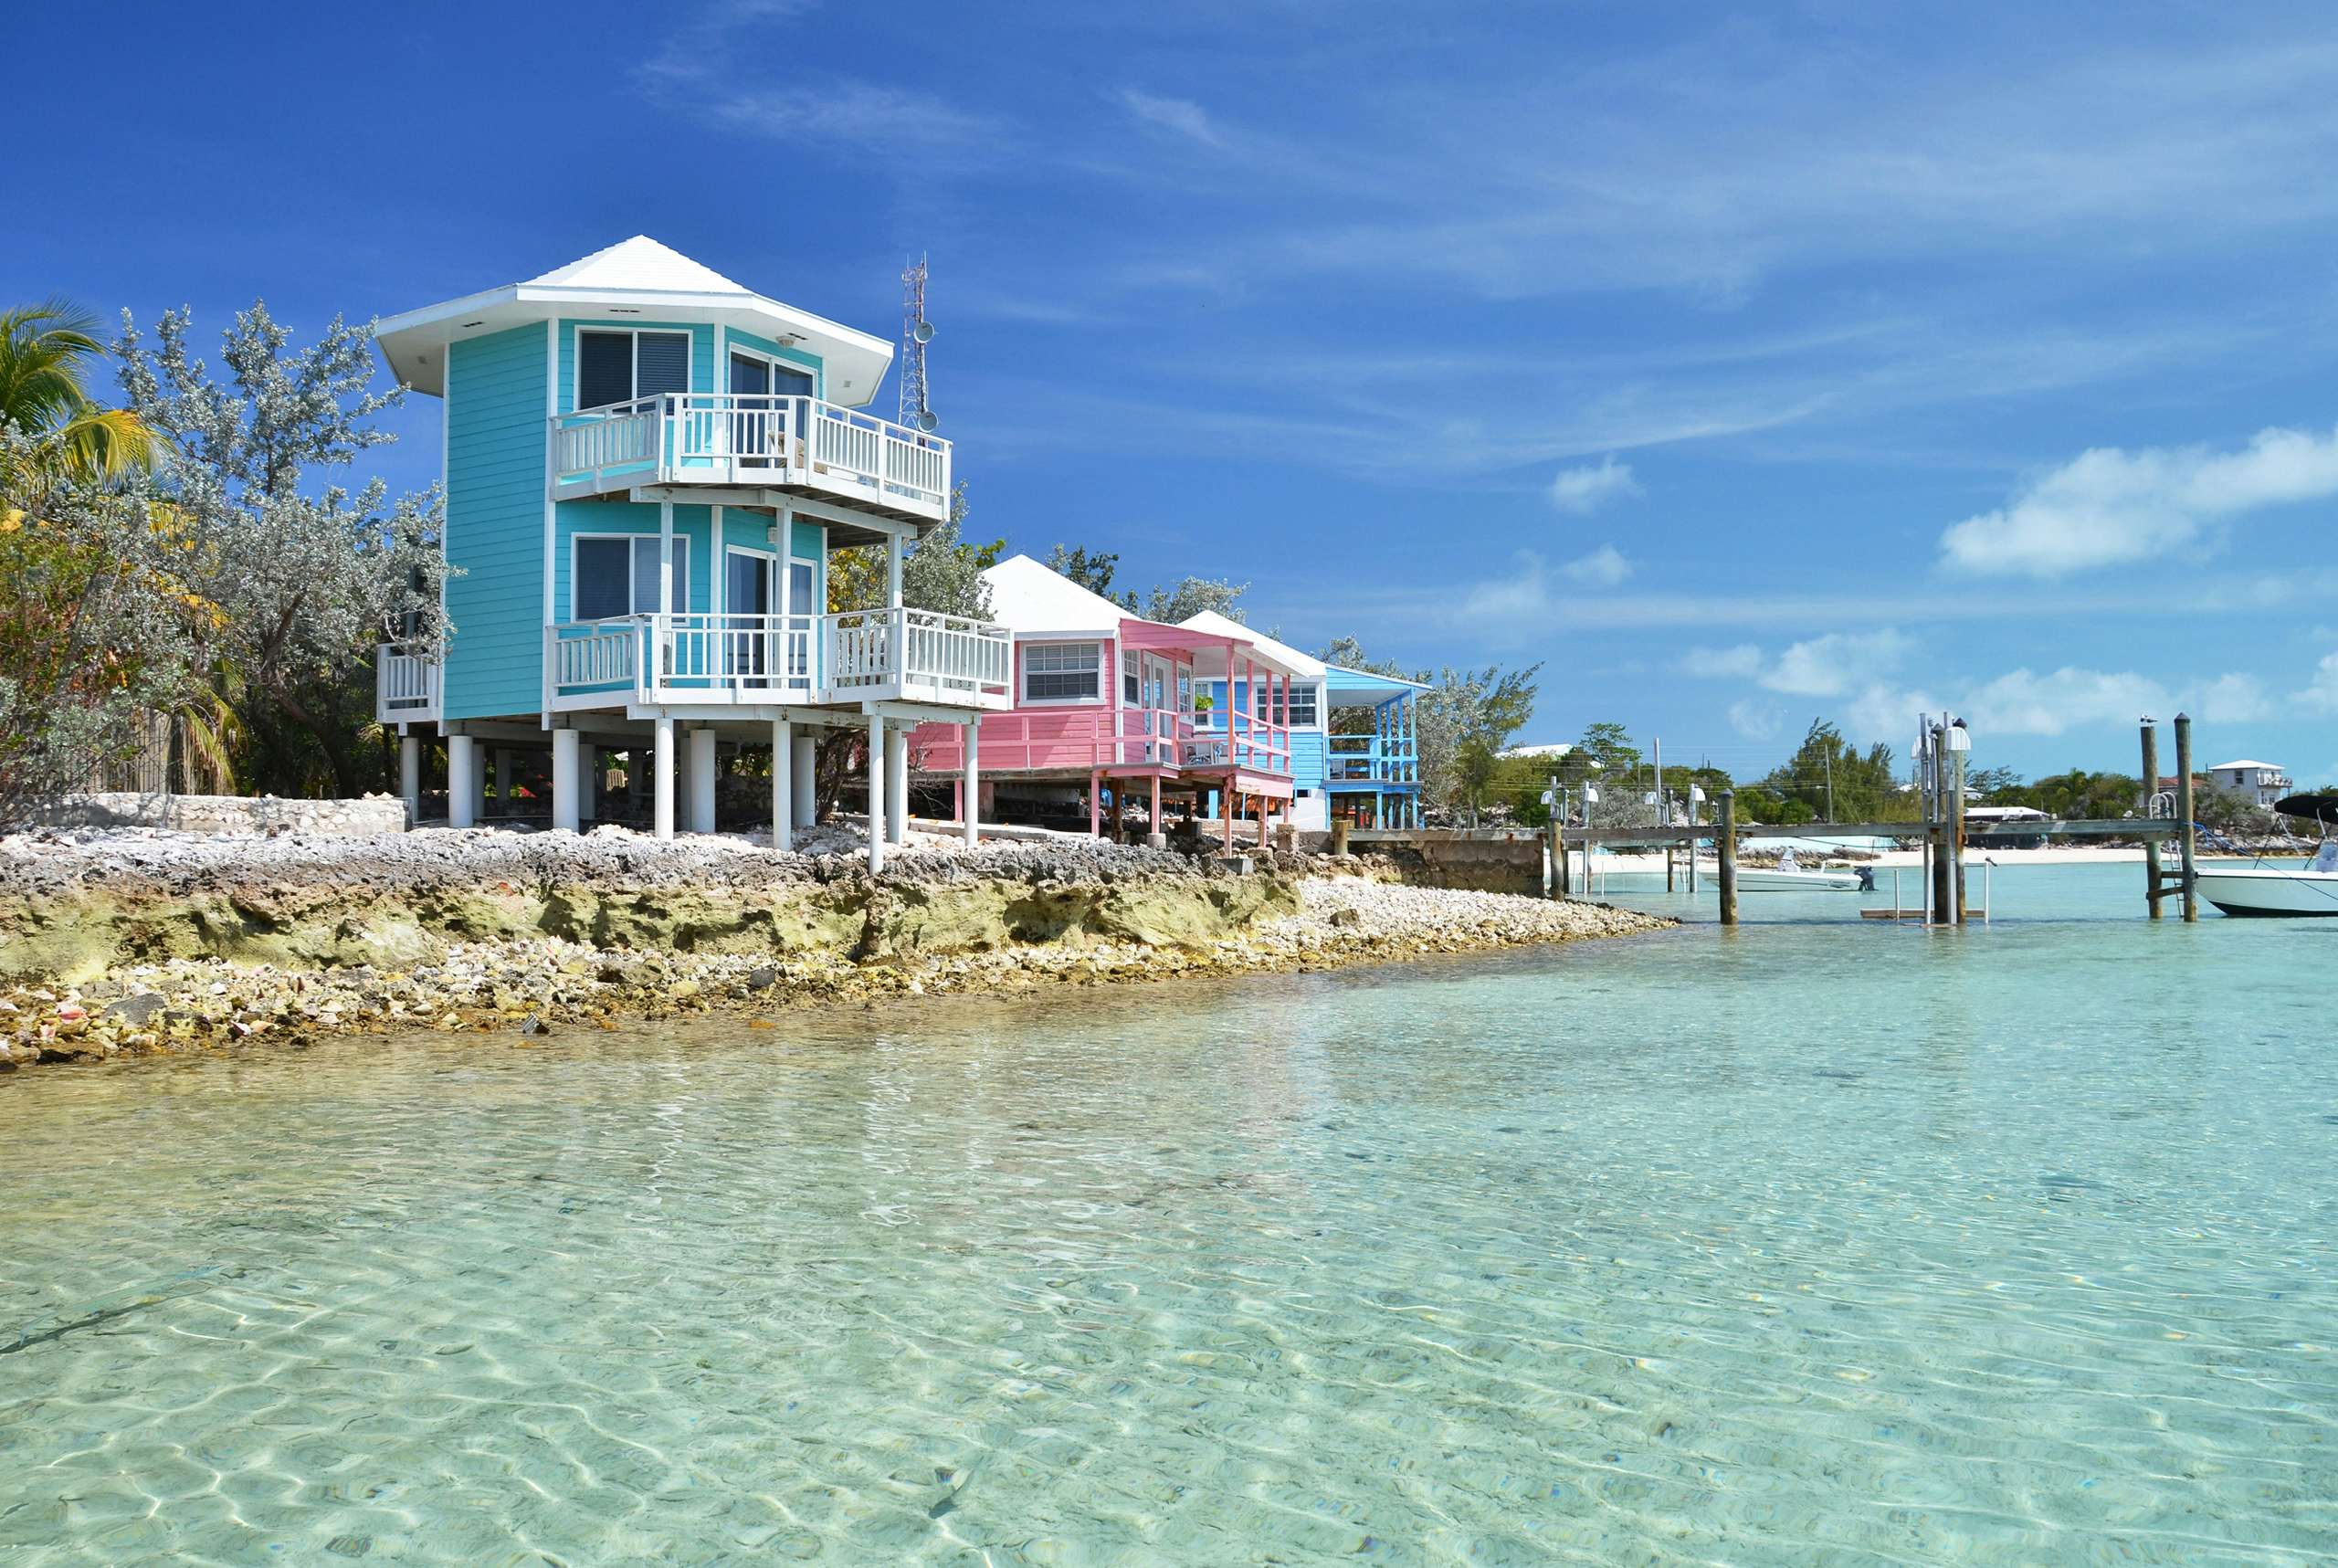 Picturesque house constructions at waters edge of Staniel cay